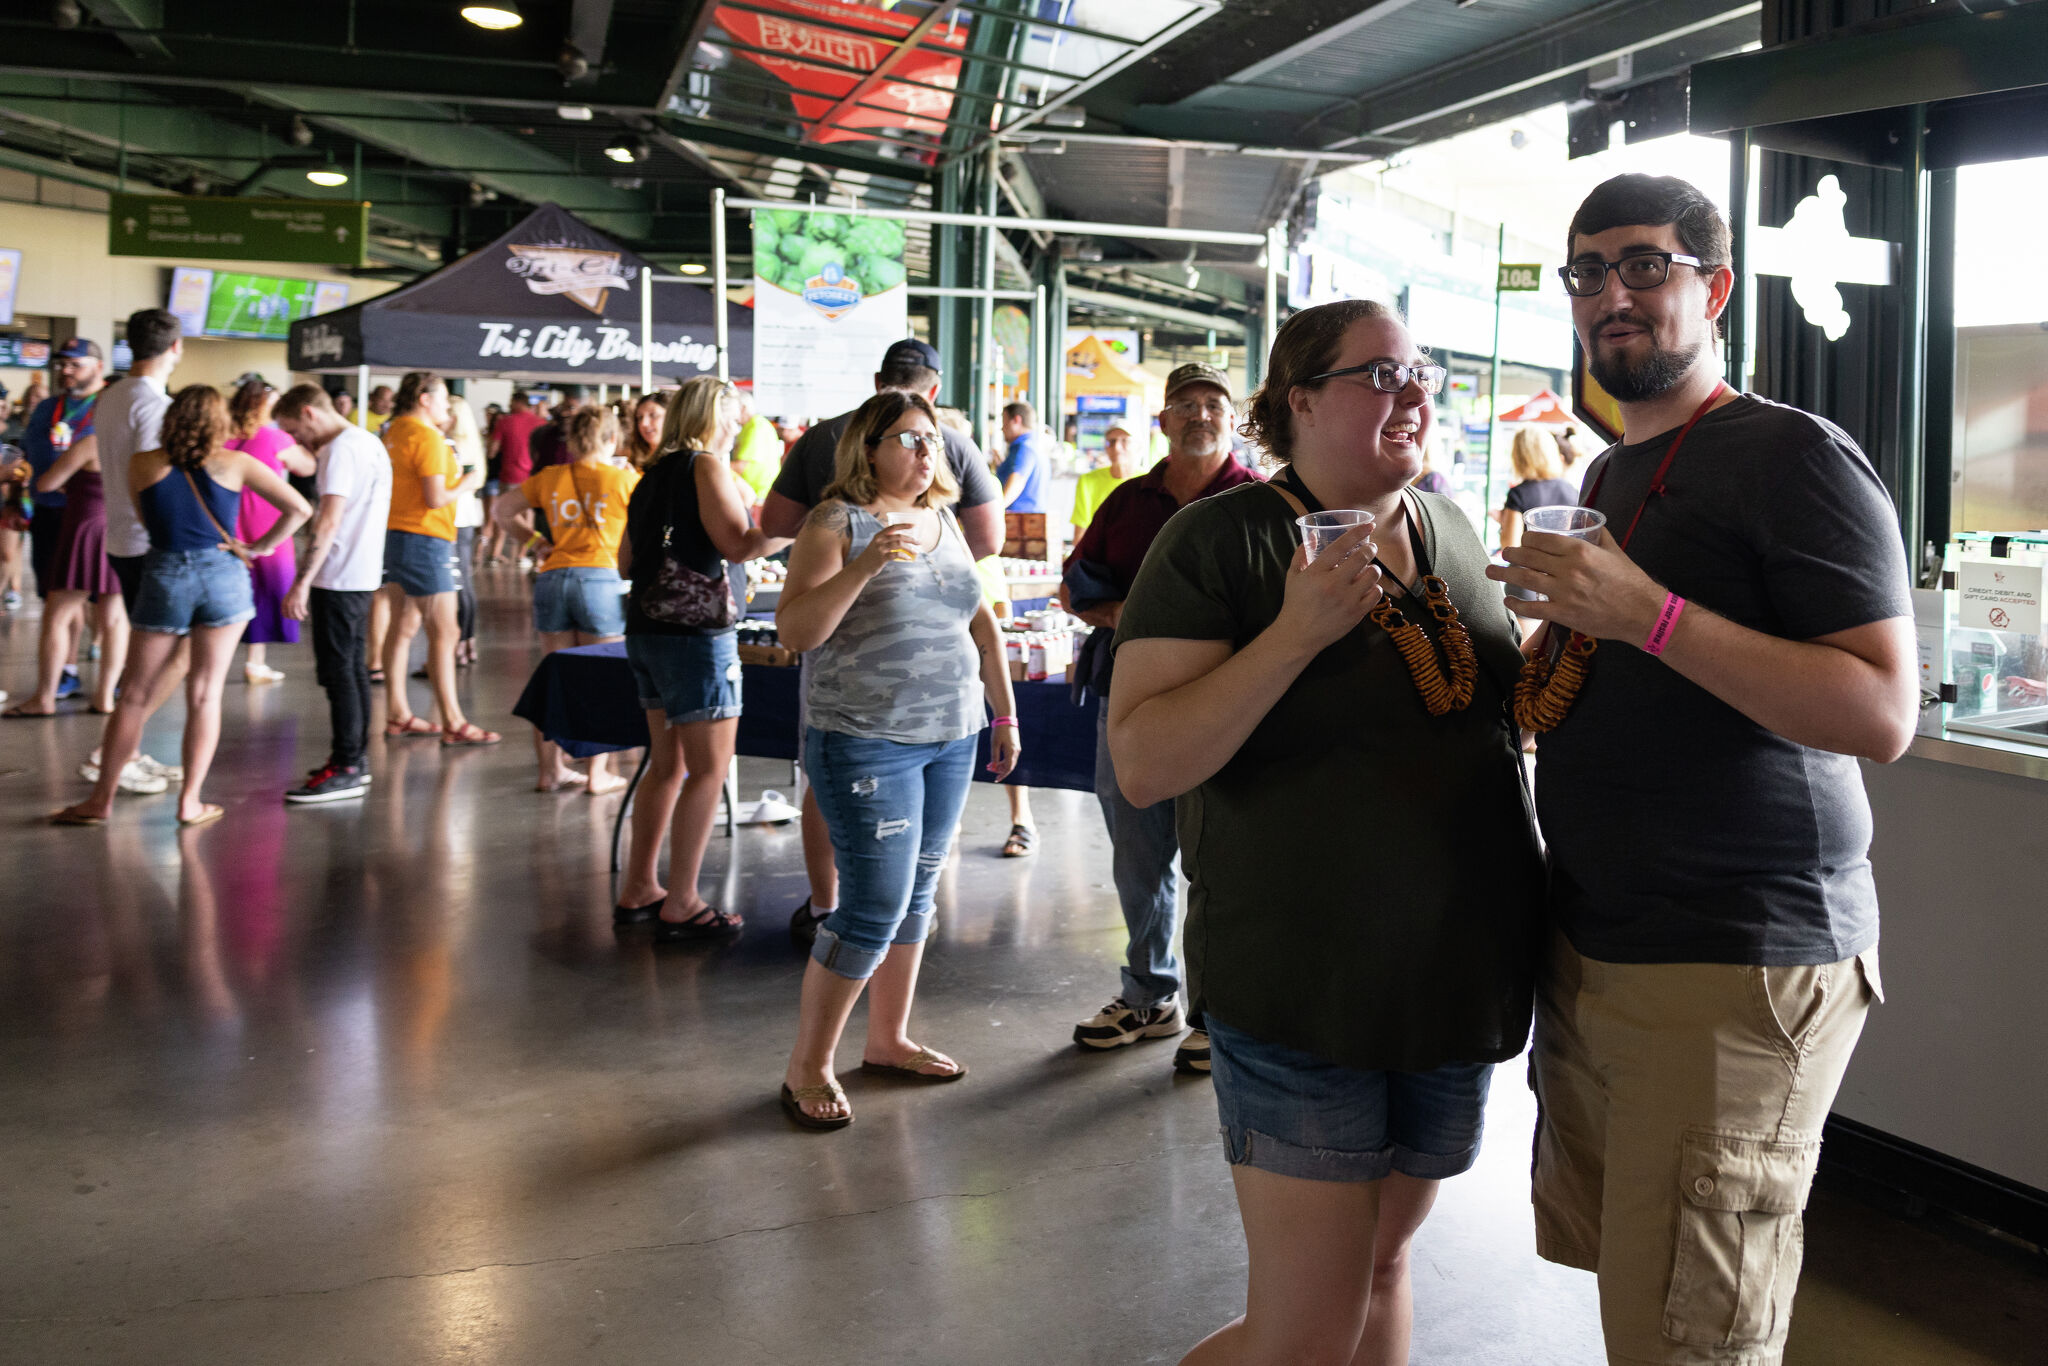 Beer vendor: 'Stop buying beer on the concourse